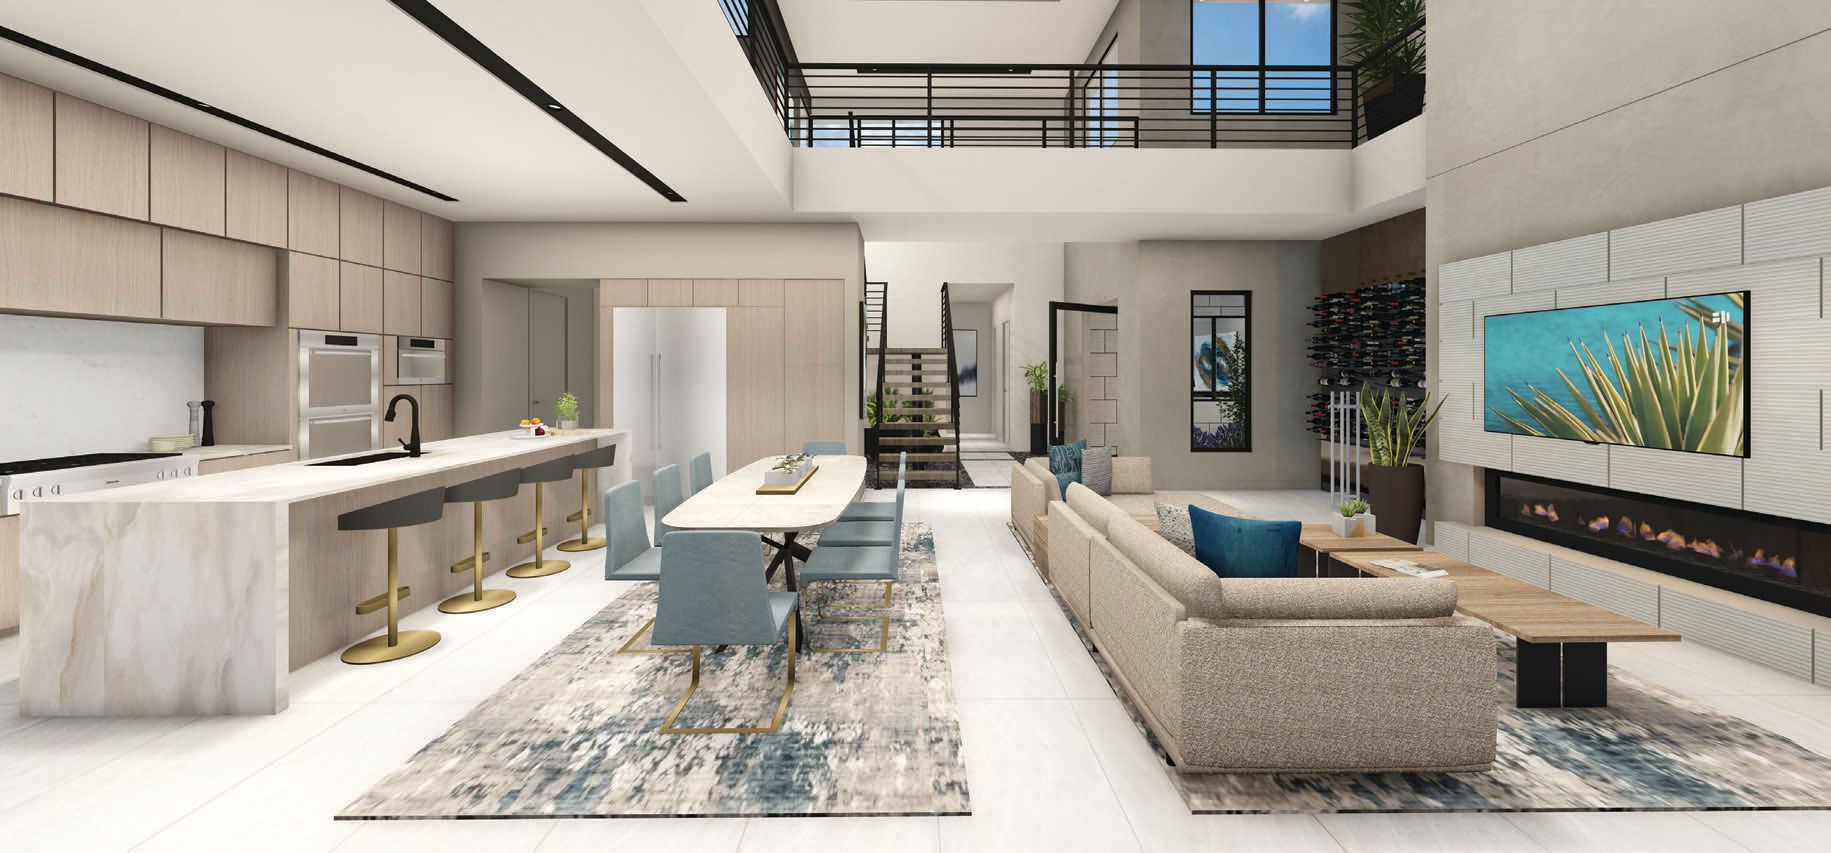 Reveal’s great room brings the dining area and kitchen together in one open space. RENDERING COURTESY OF BLUE HERON